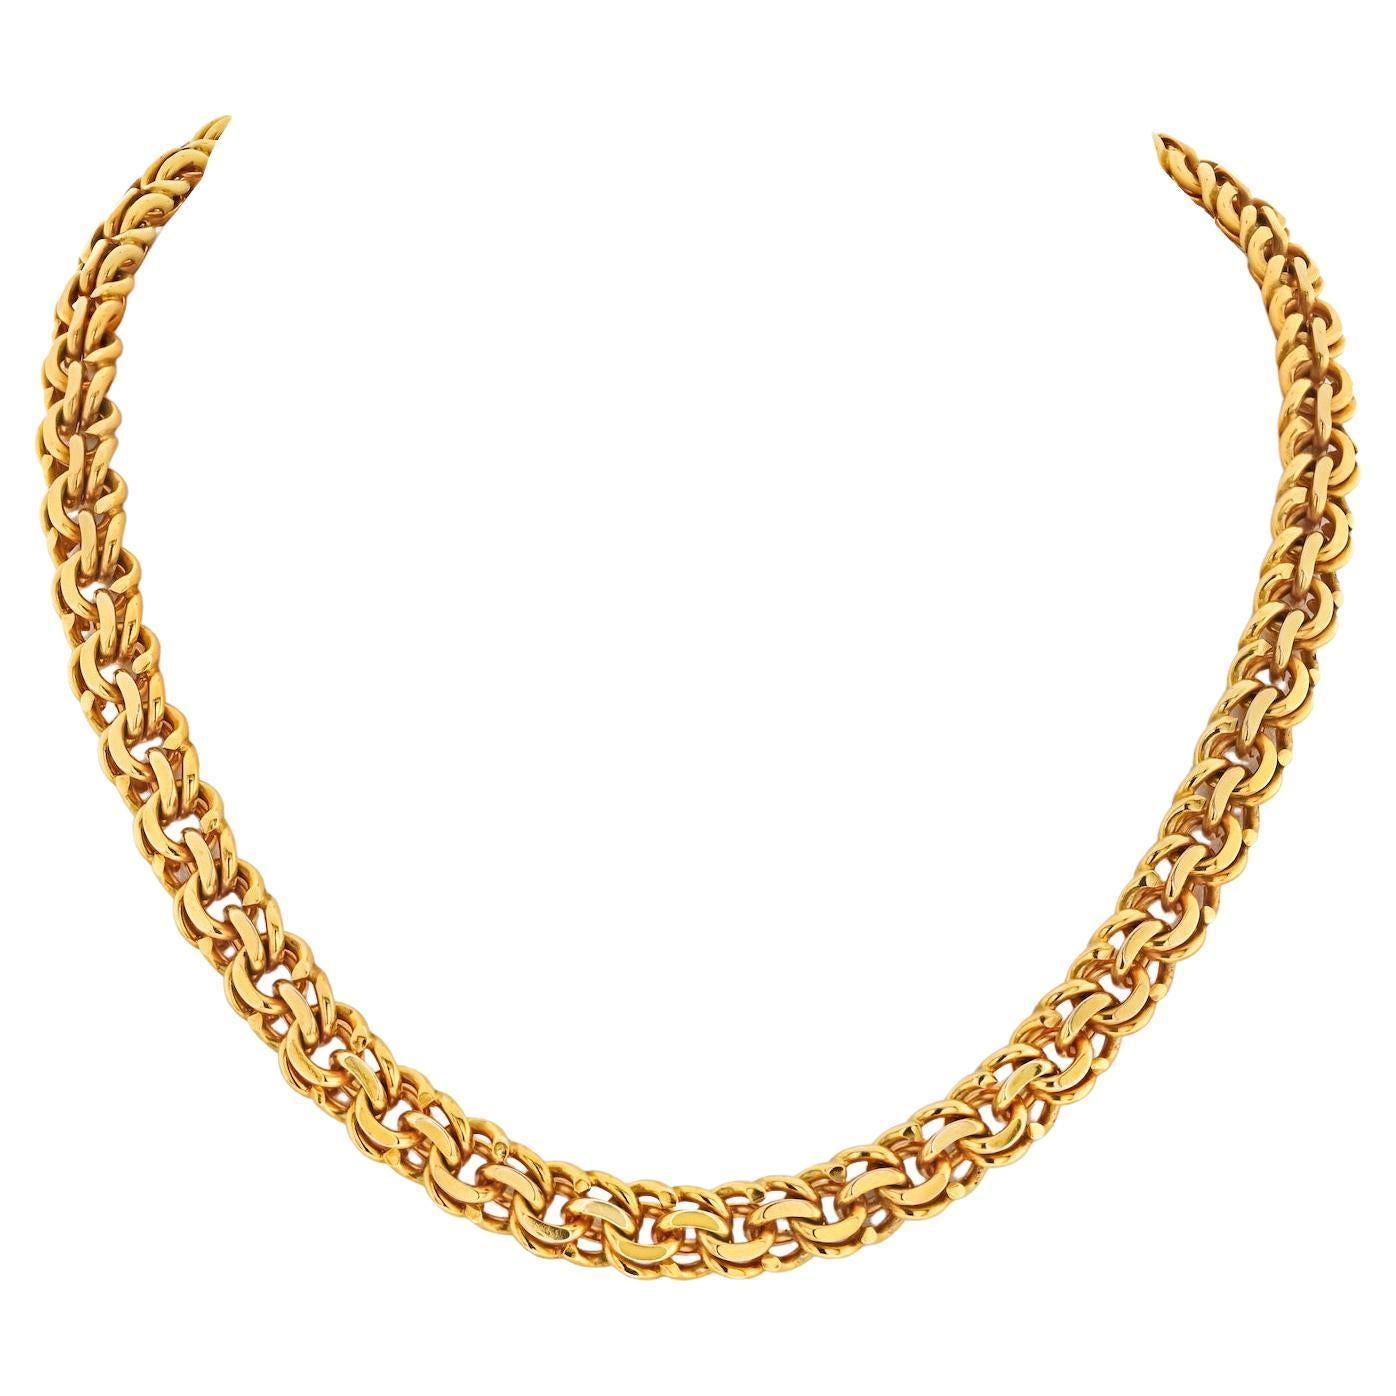 Cartier 18k Yellow Gold Byzantine Vintage Chain Necklace